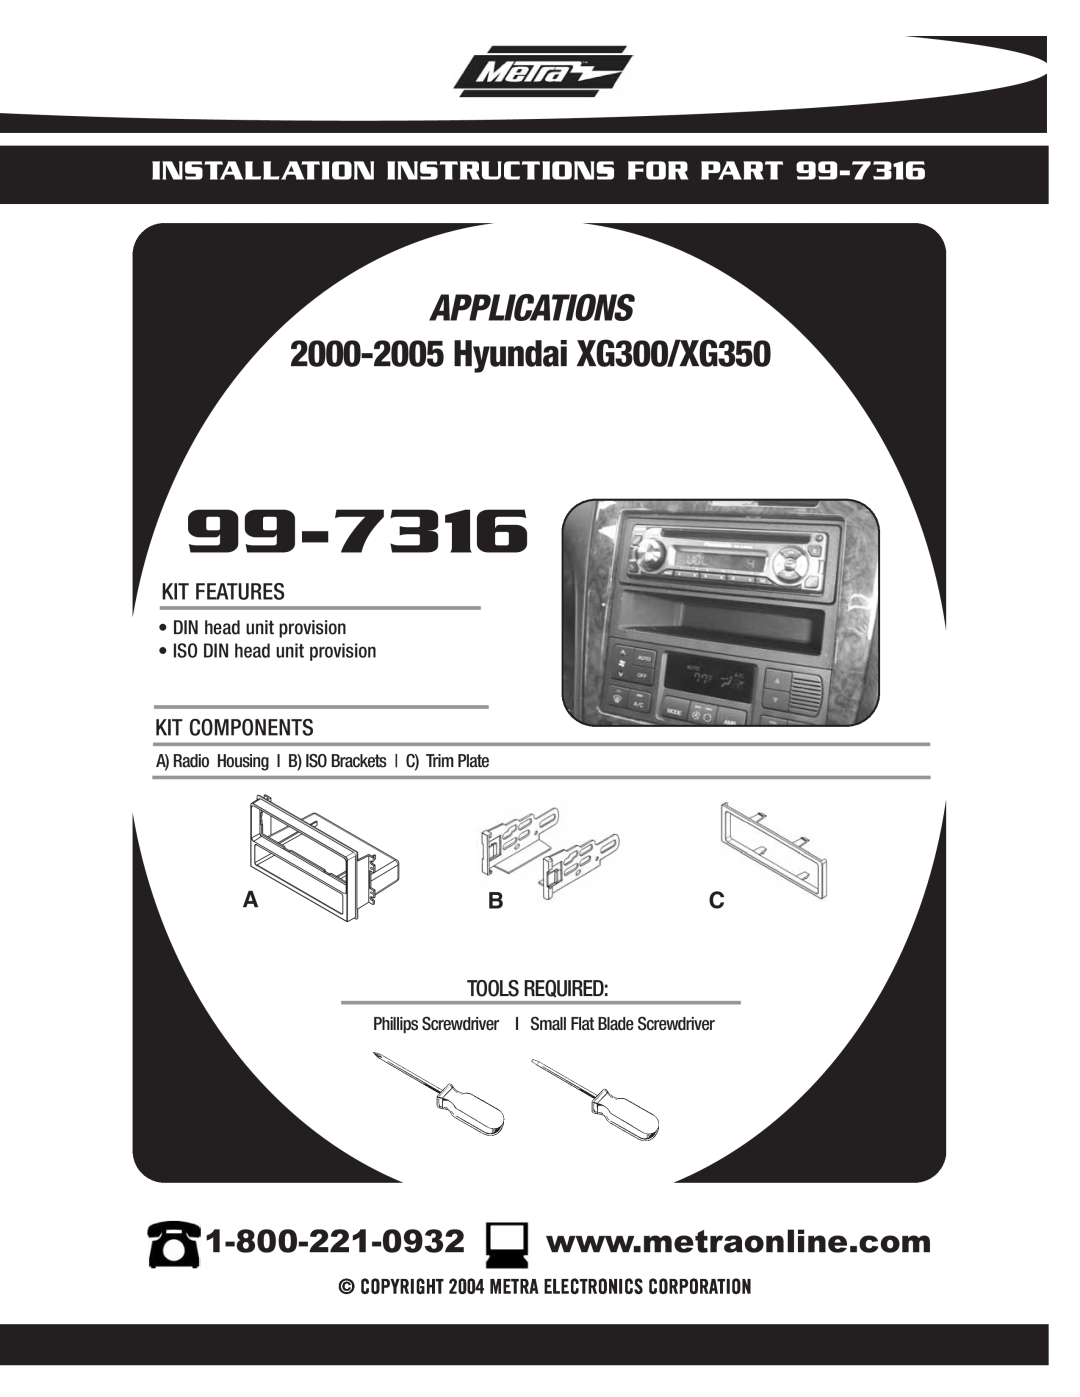 Metra Electronics 99-7316 installation instructions Applications, Hyundai XG300/XG350, Installation Instructions For Part 